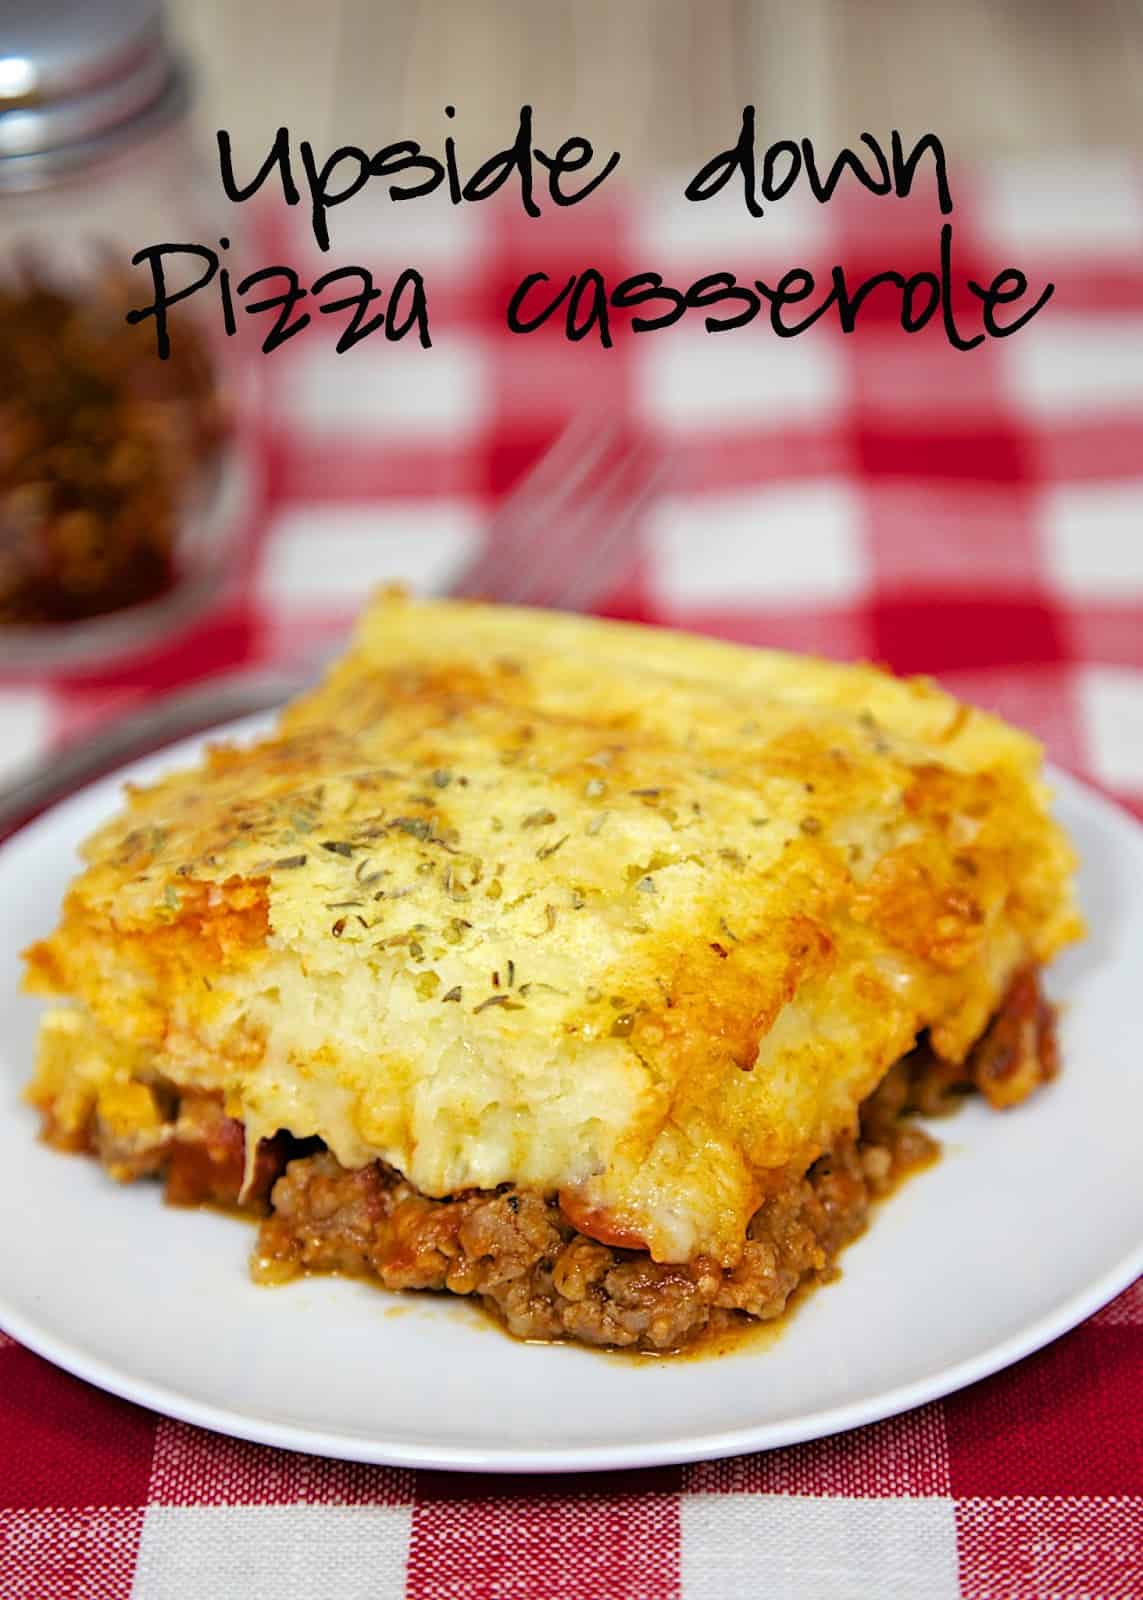 Upside Down Pizza Casserole Recipe - quick pizza casserole with the crust baked on top. Use your favorite pizza toppings. It was gone in a flash!! Great change to regular pizza.